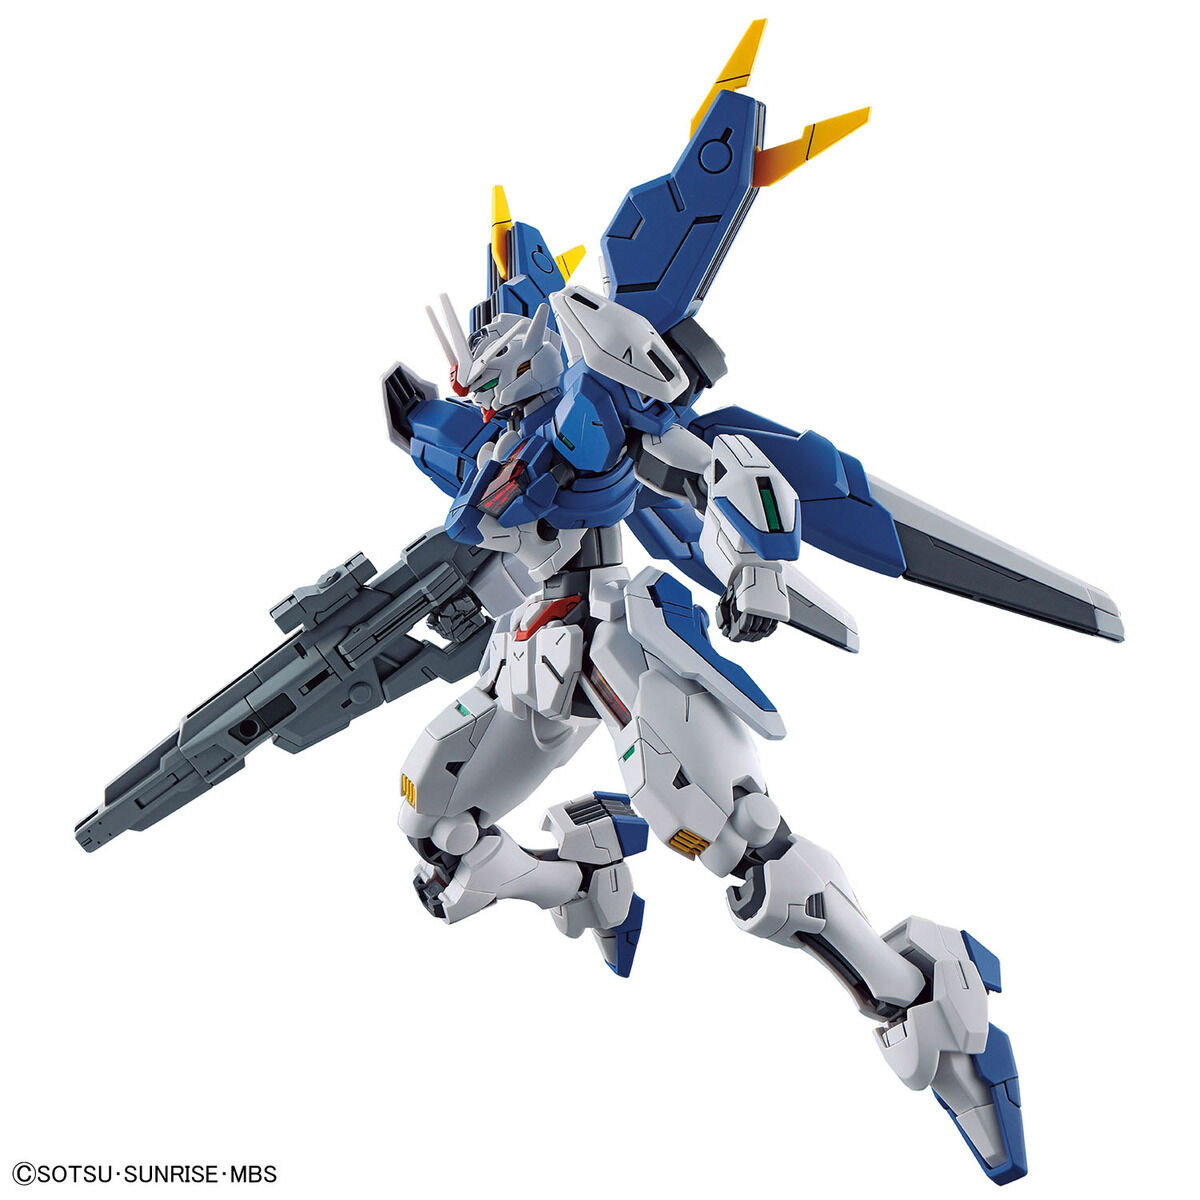 HG Gundam Aerial Rebuild (Mobile Suit Gundam: The Witch From